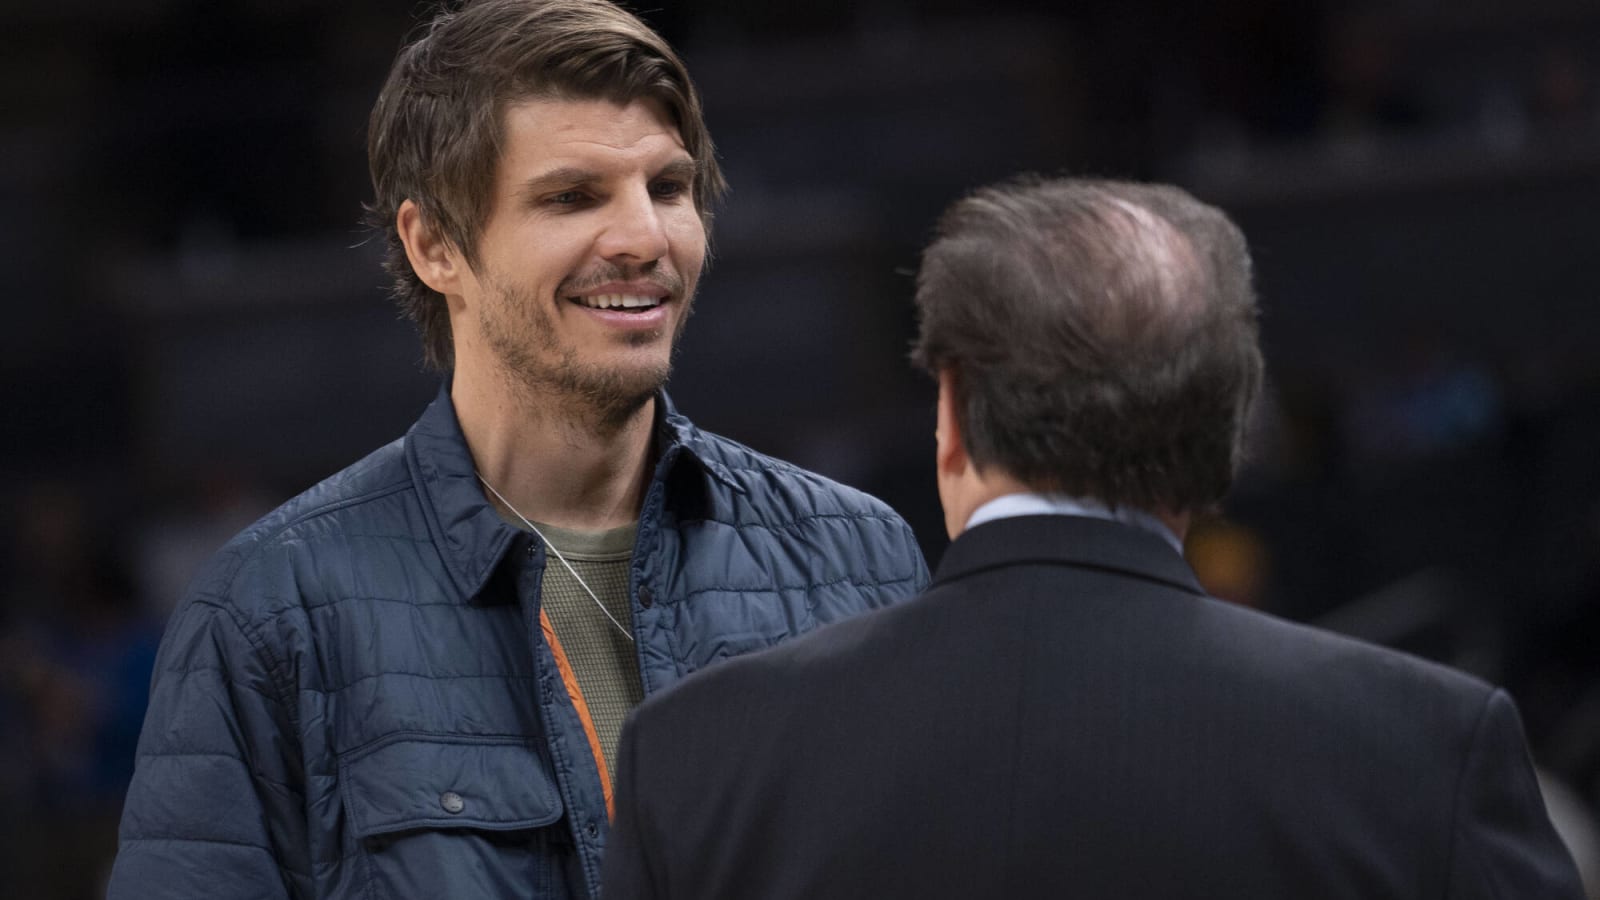 Hawks Officially Promote Kyle Korver to Assistant GM